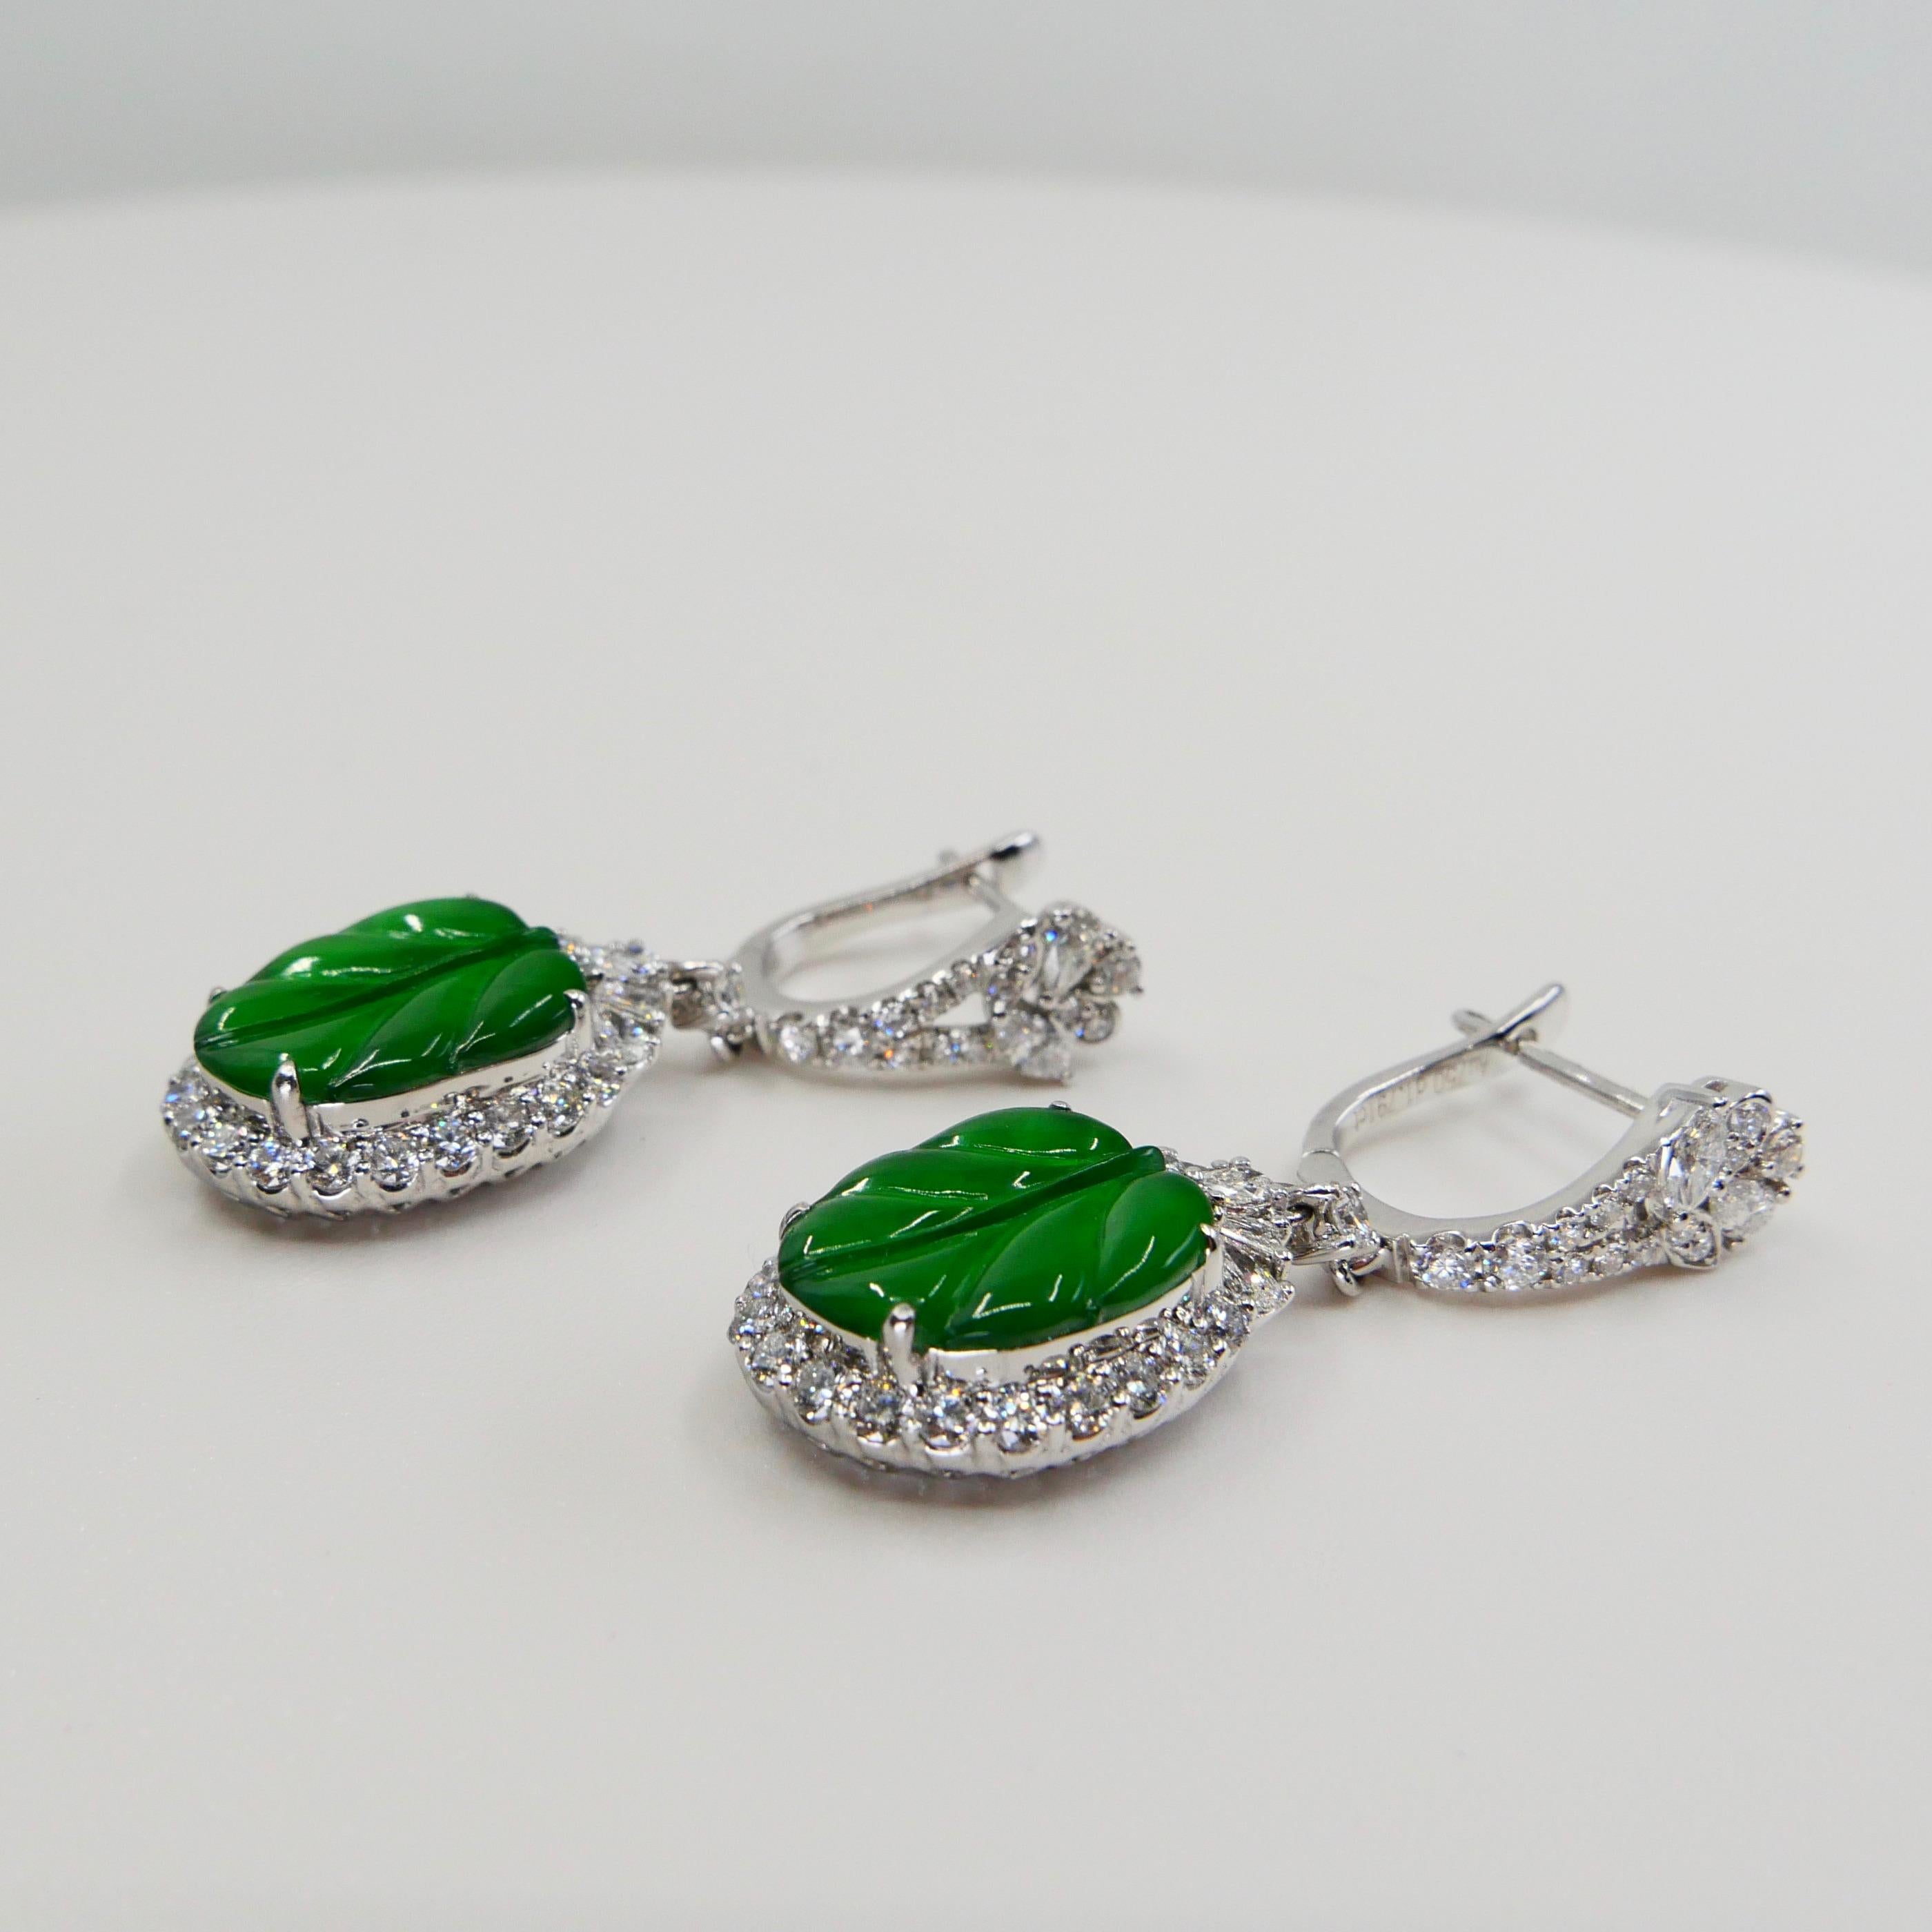 Certified Icy Apple Green Jade and Diamond Earrings, Almost Imperial Green 3